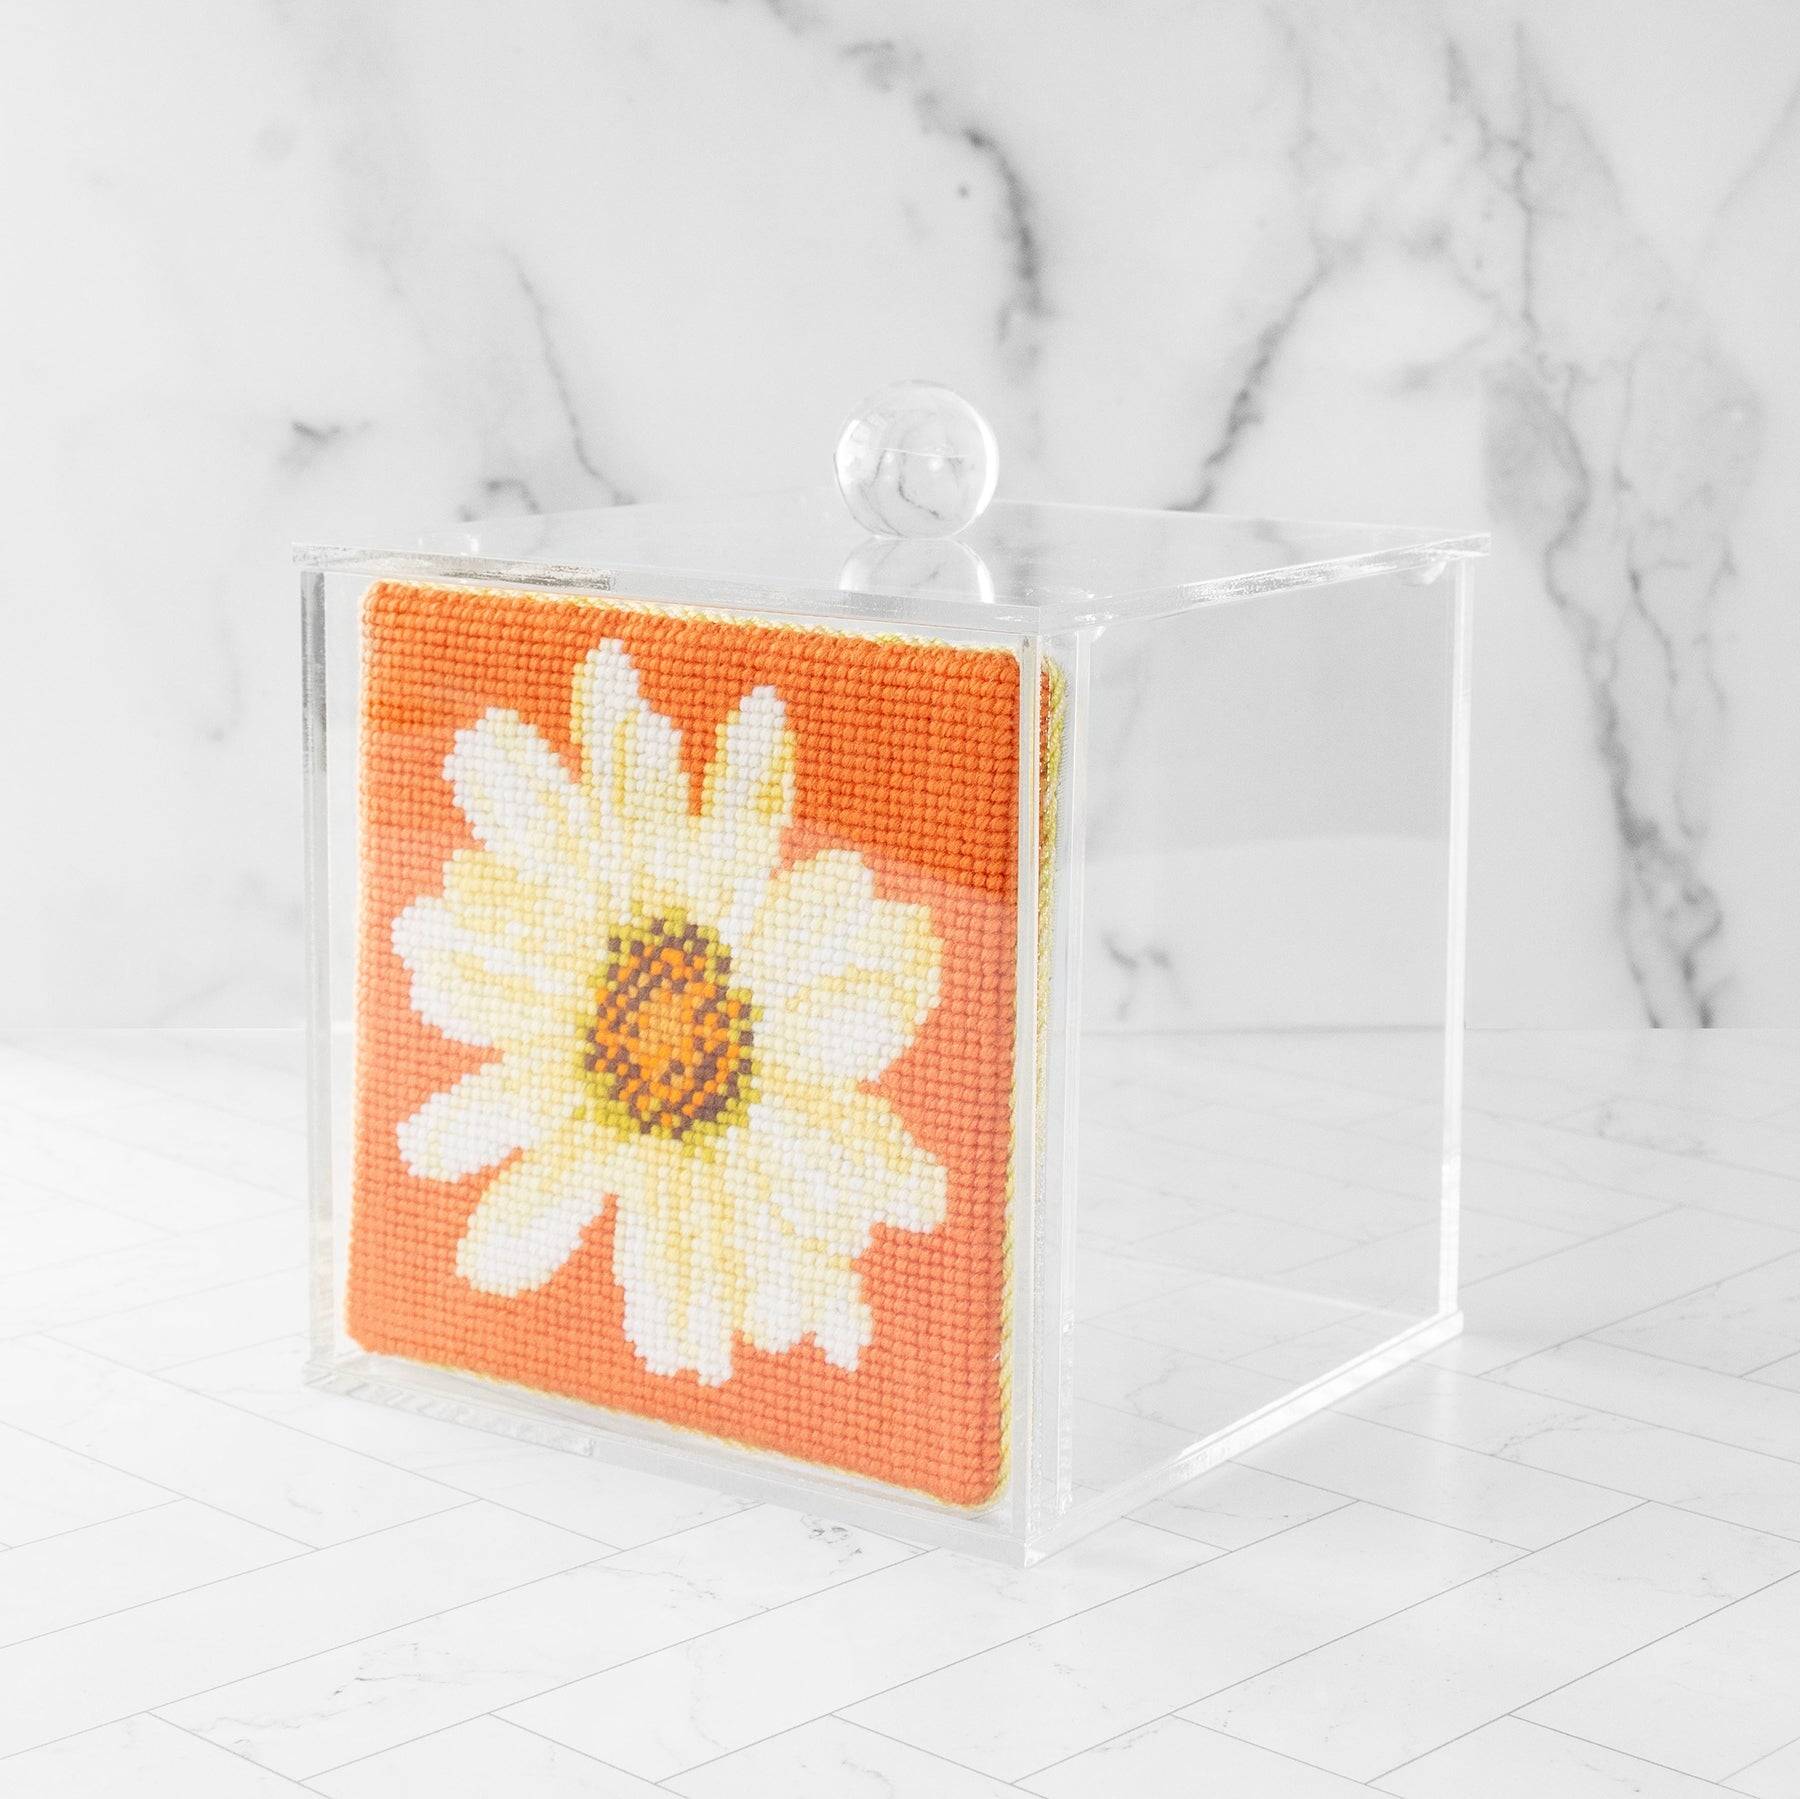 Daisy mini kit finished in candy box